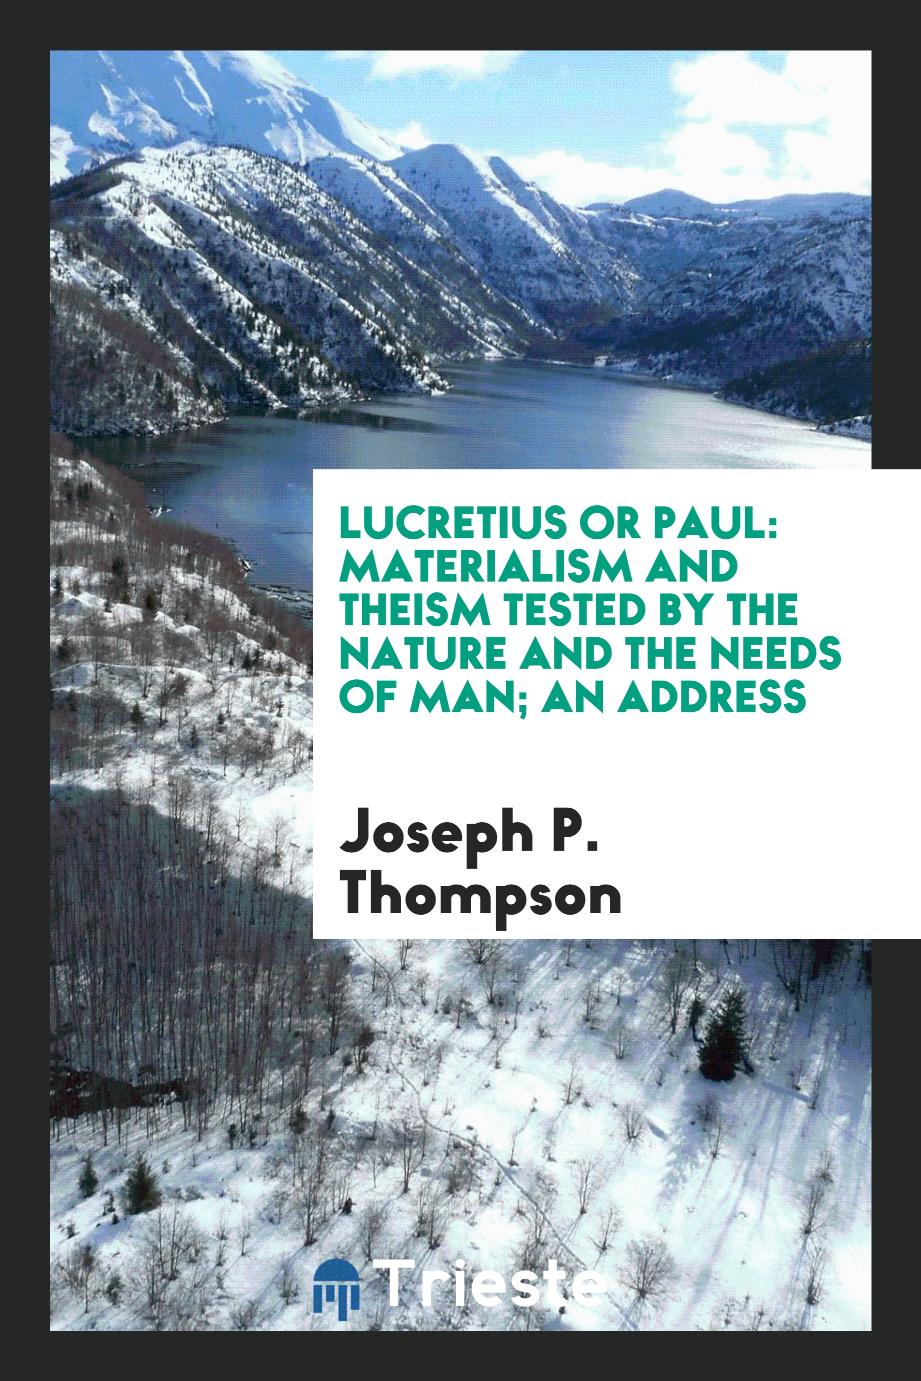 Lucretius or Paul: Materialism and theism tested by the nature and the needs of man; an address